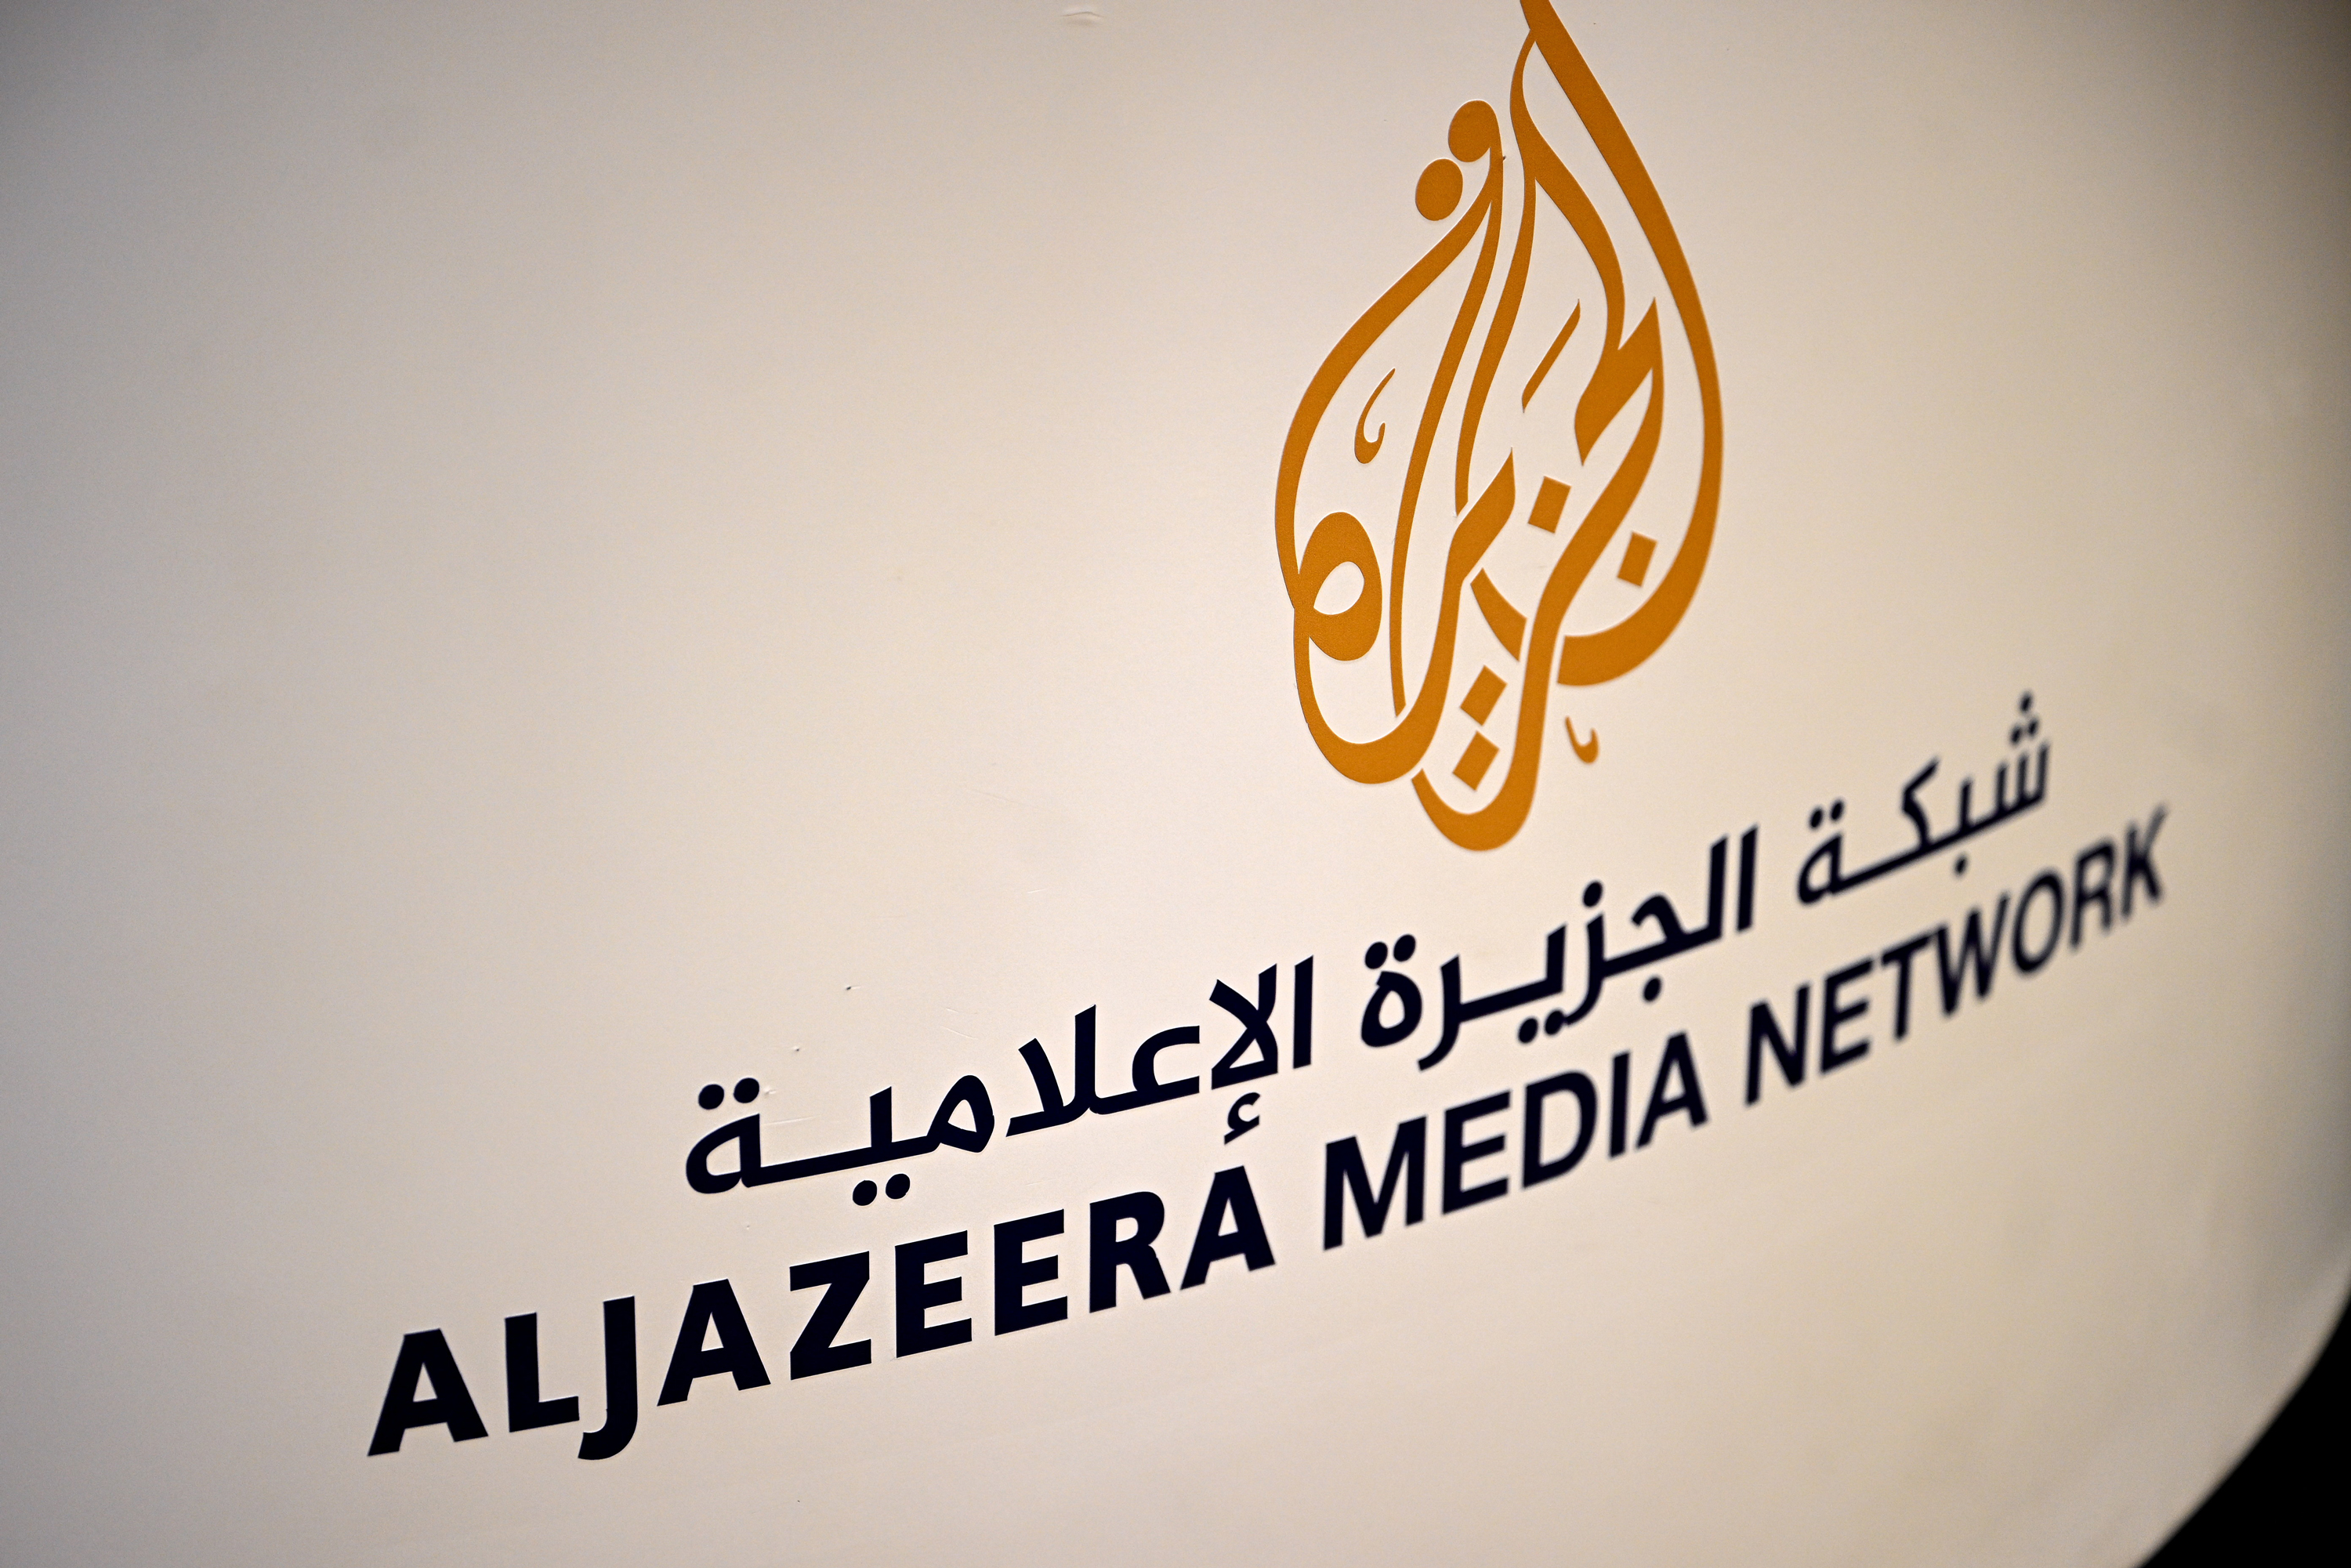 A view of the Al Jazeera logo during day two of Web Summit Qatar at the Doha Exhibition and Convention Center in Doha, Qatar on February, 28.